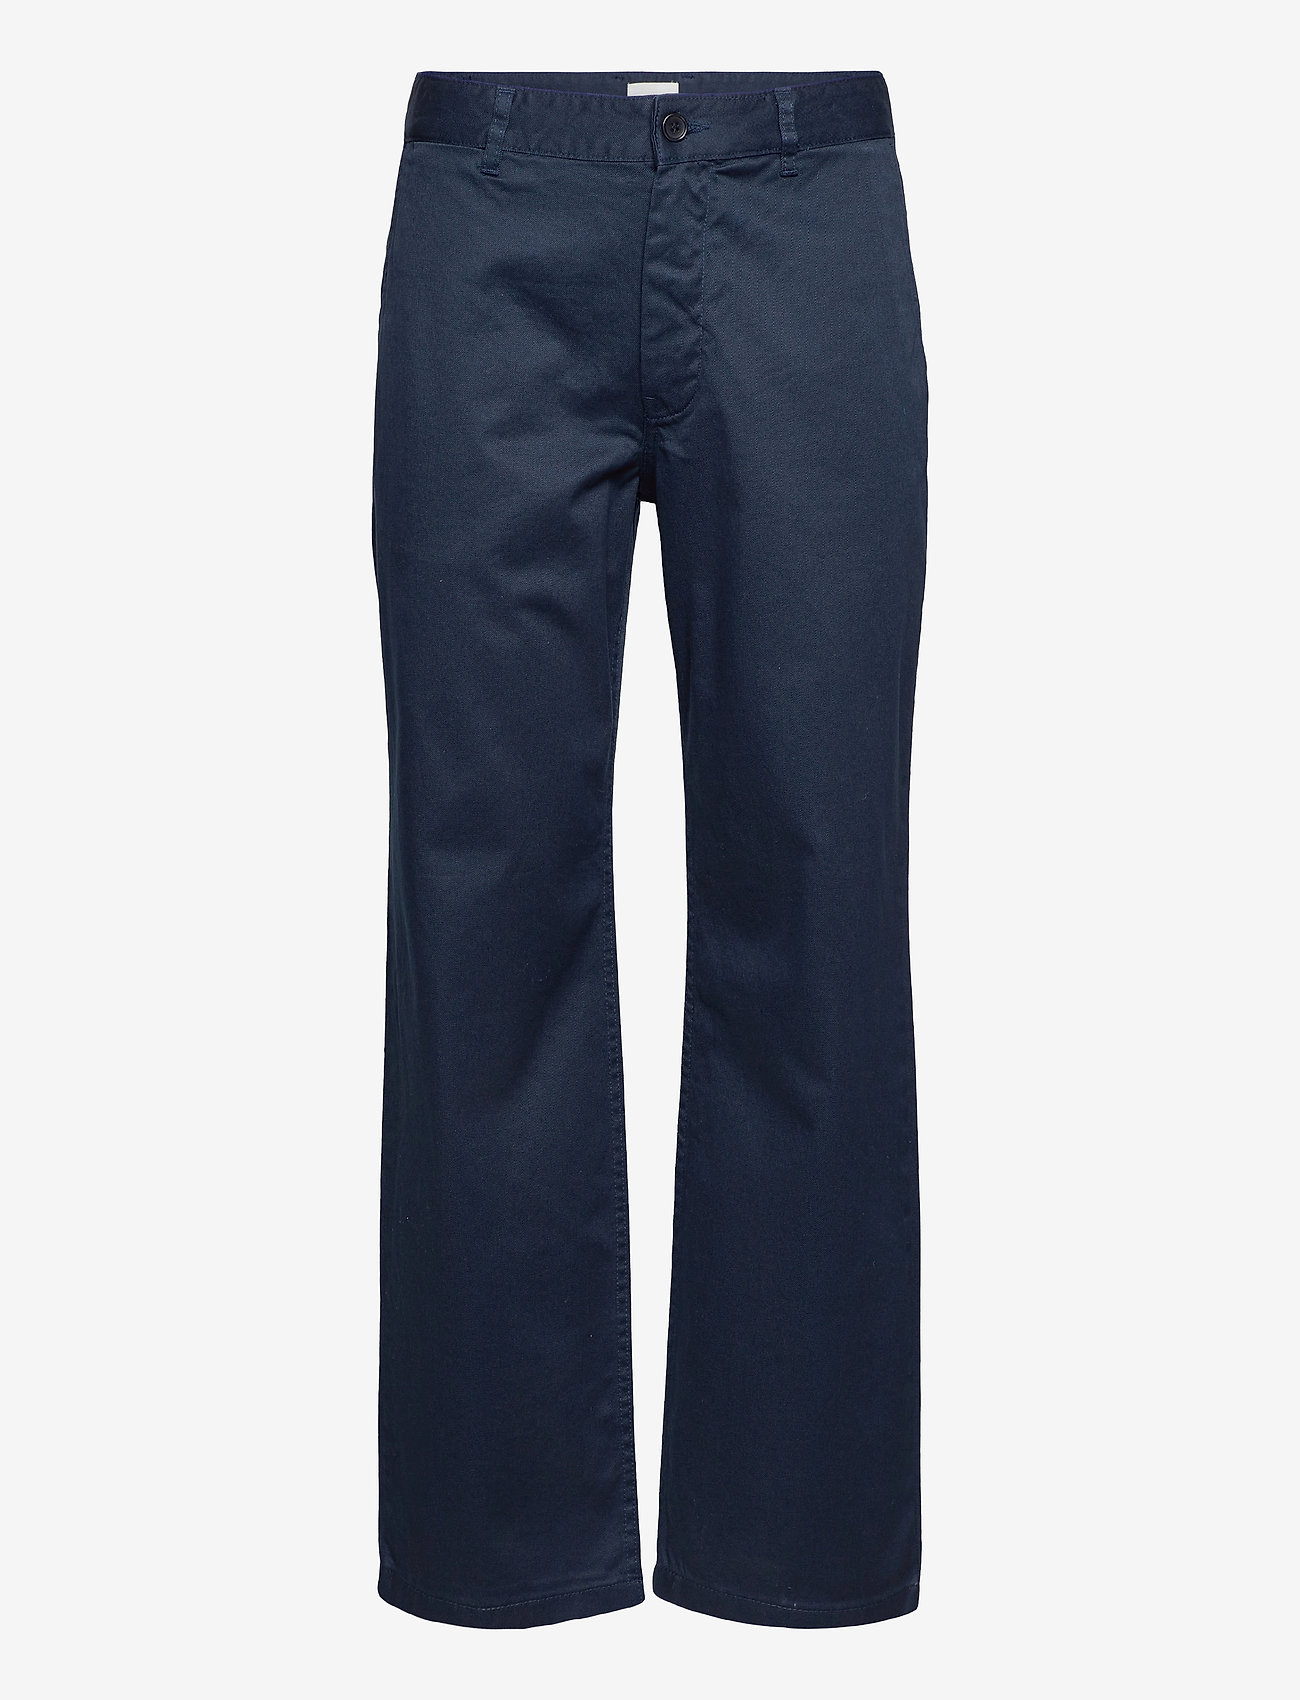 Wood Wood - Stefan classic trousers - chinosy - navy - 0